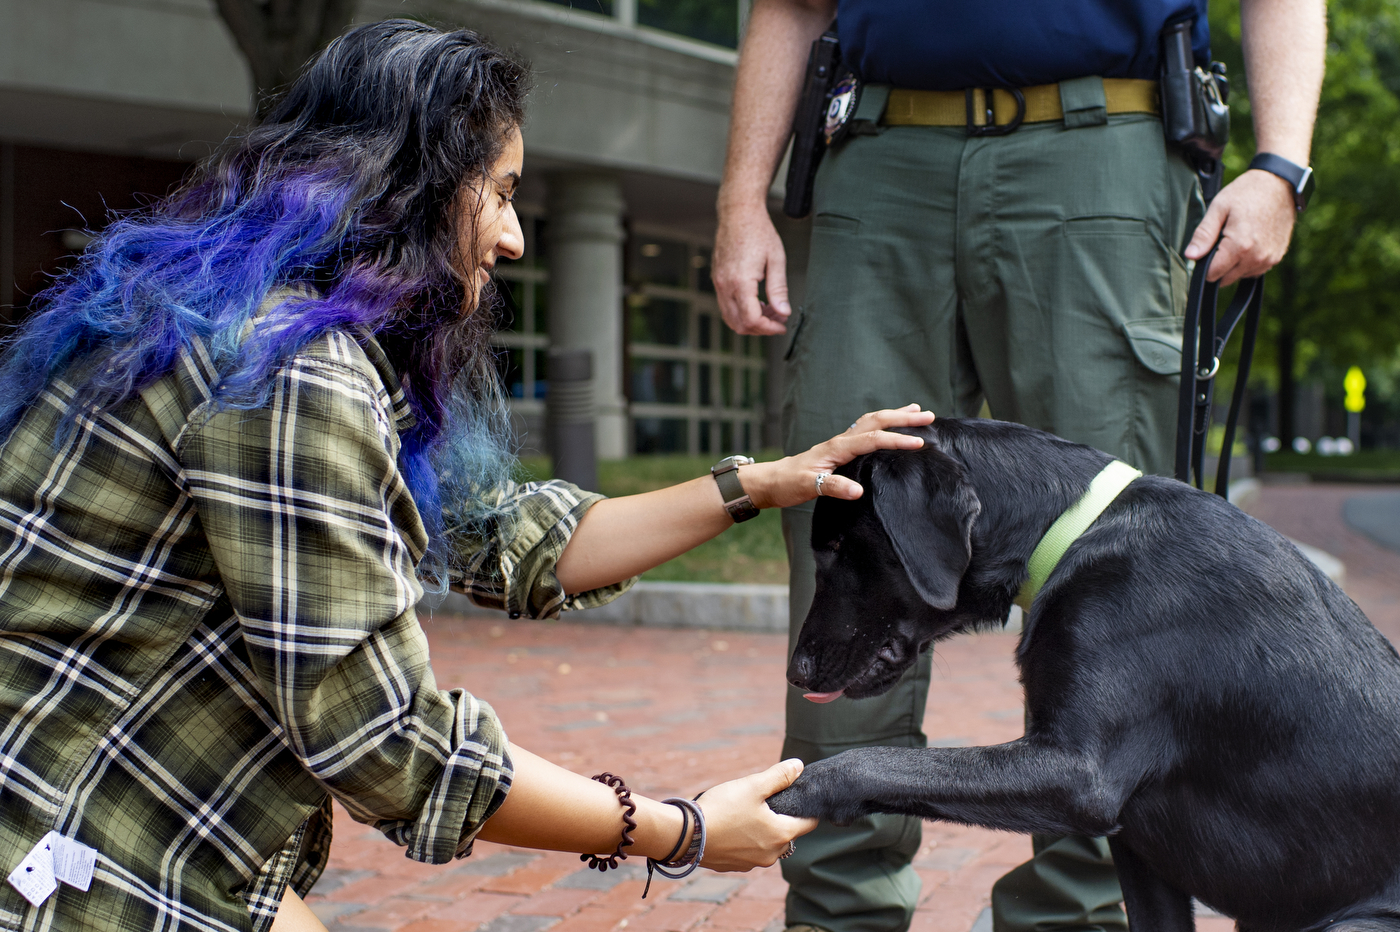 Sarge, a 1-year old black lab and the newest member of Northeastern's pack, shakes hands with mechanical engineering student Shreya Mathawan in Centennial Common while on a walk with NUPD Officer Sgt. Joe Corbett.